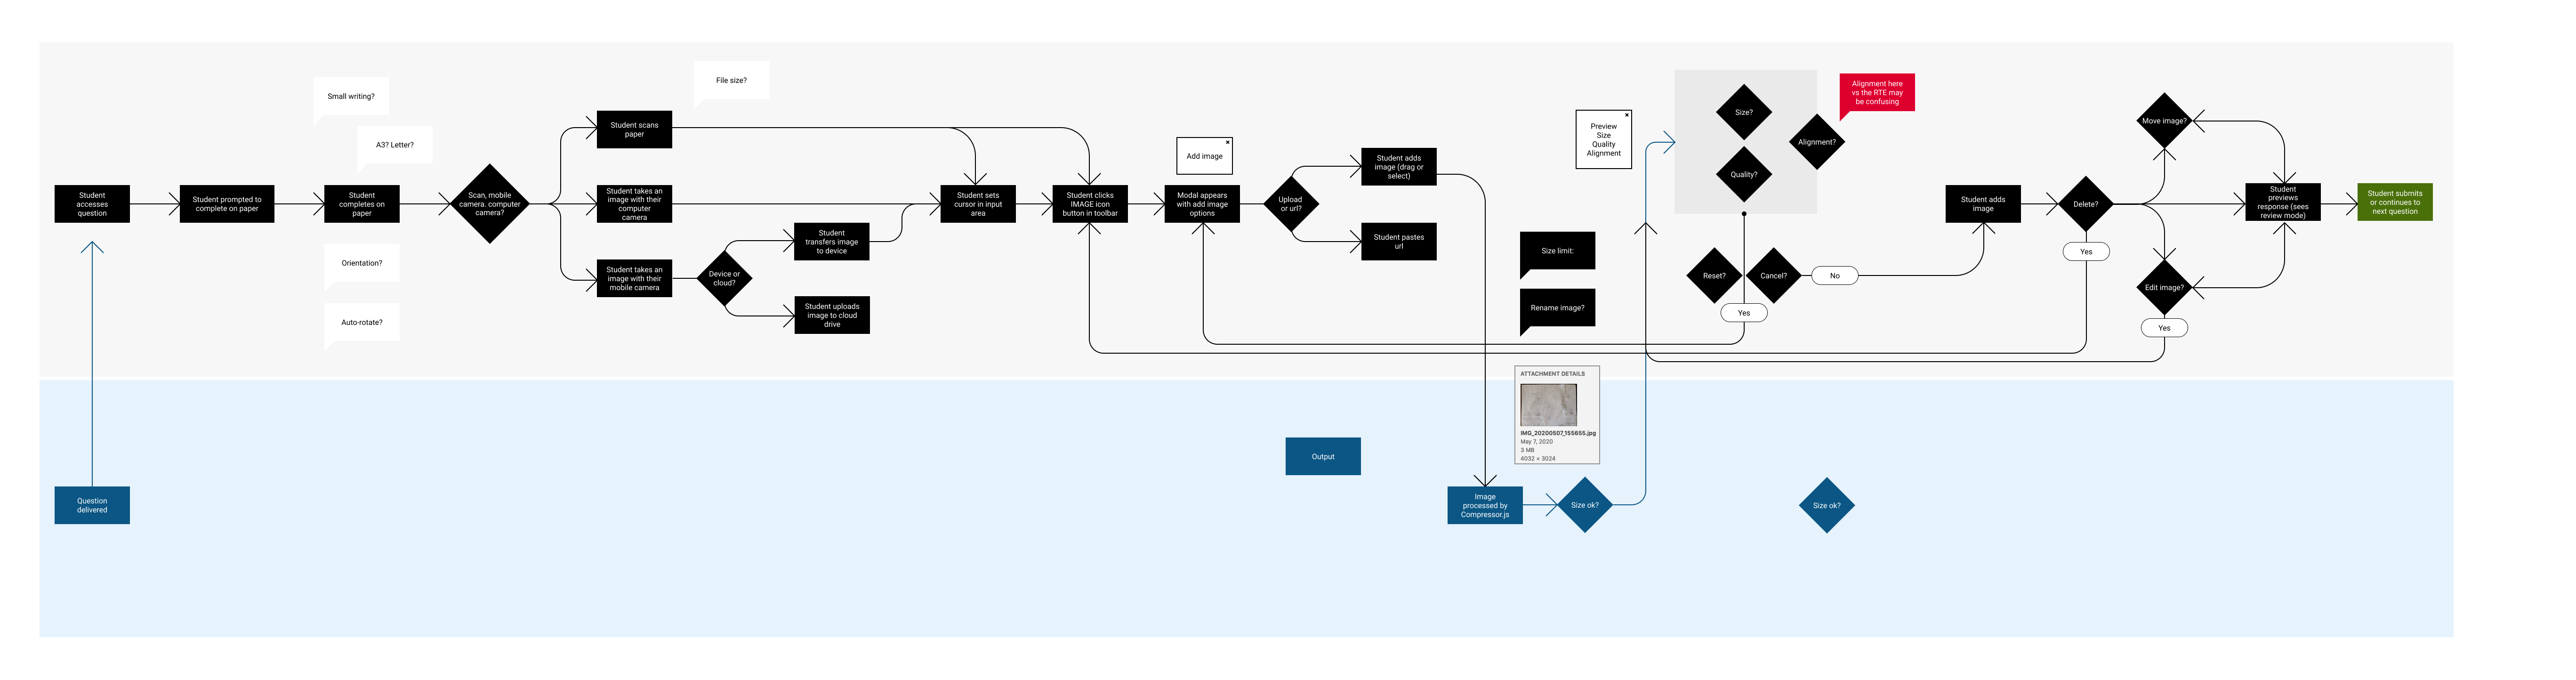 Image of the user flow of a student creating, uploading and submitting an image online.